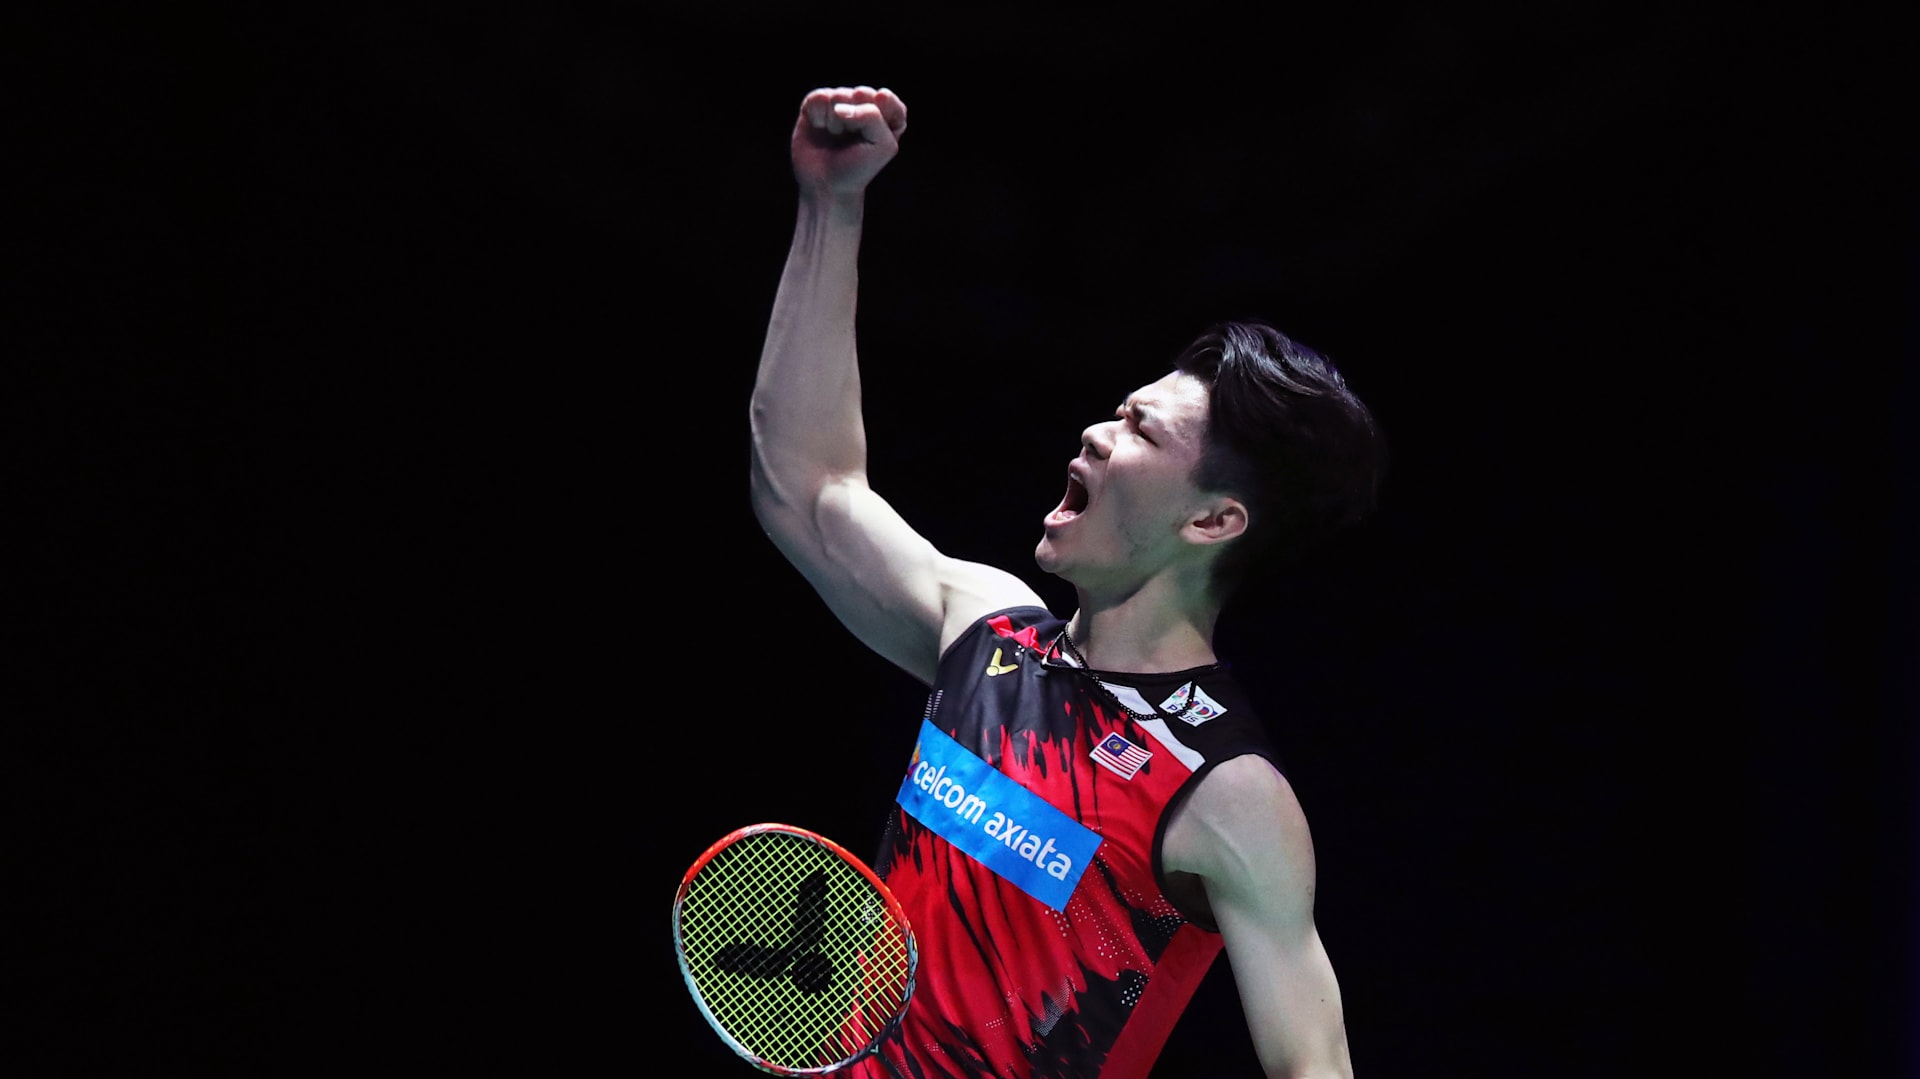 Lee Chong Wei believes Lee Zii Jia can medal at Olympic Games